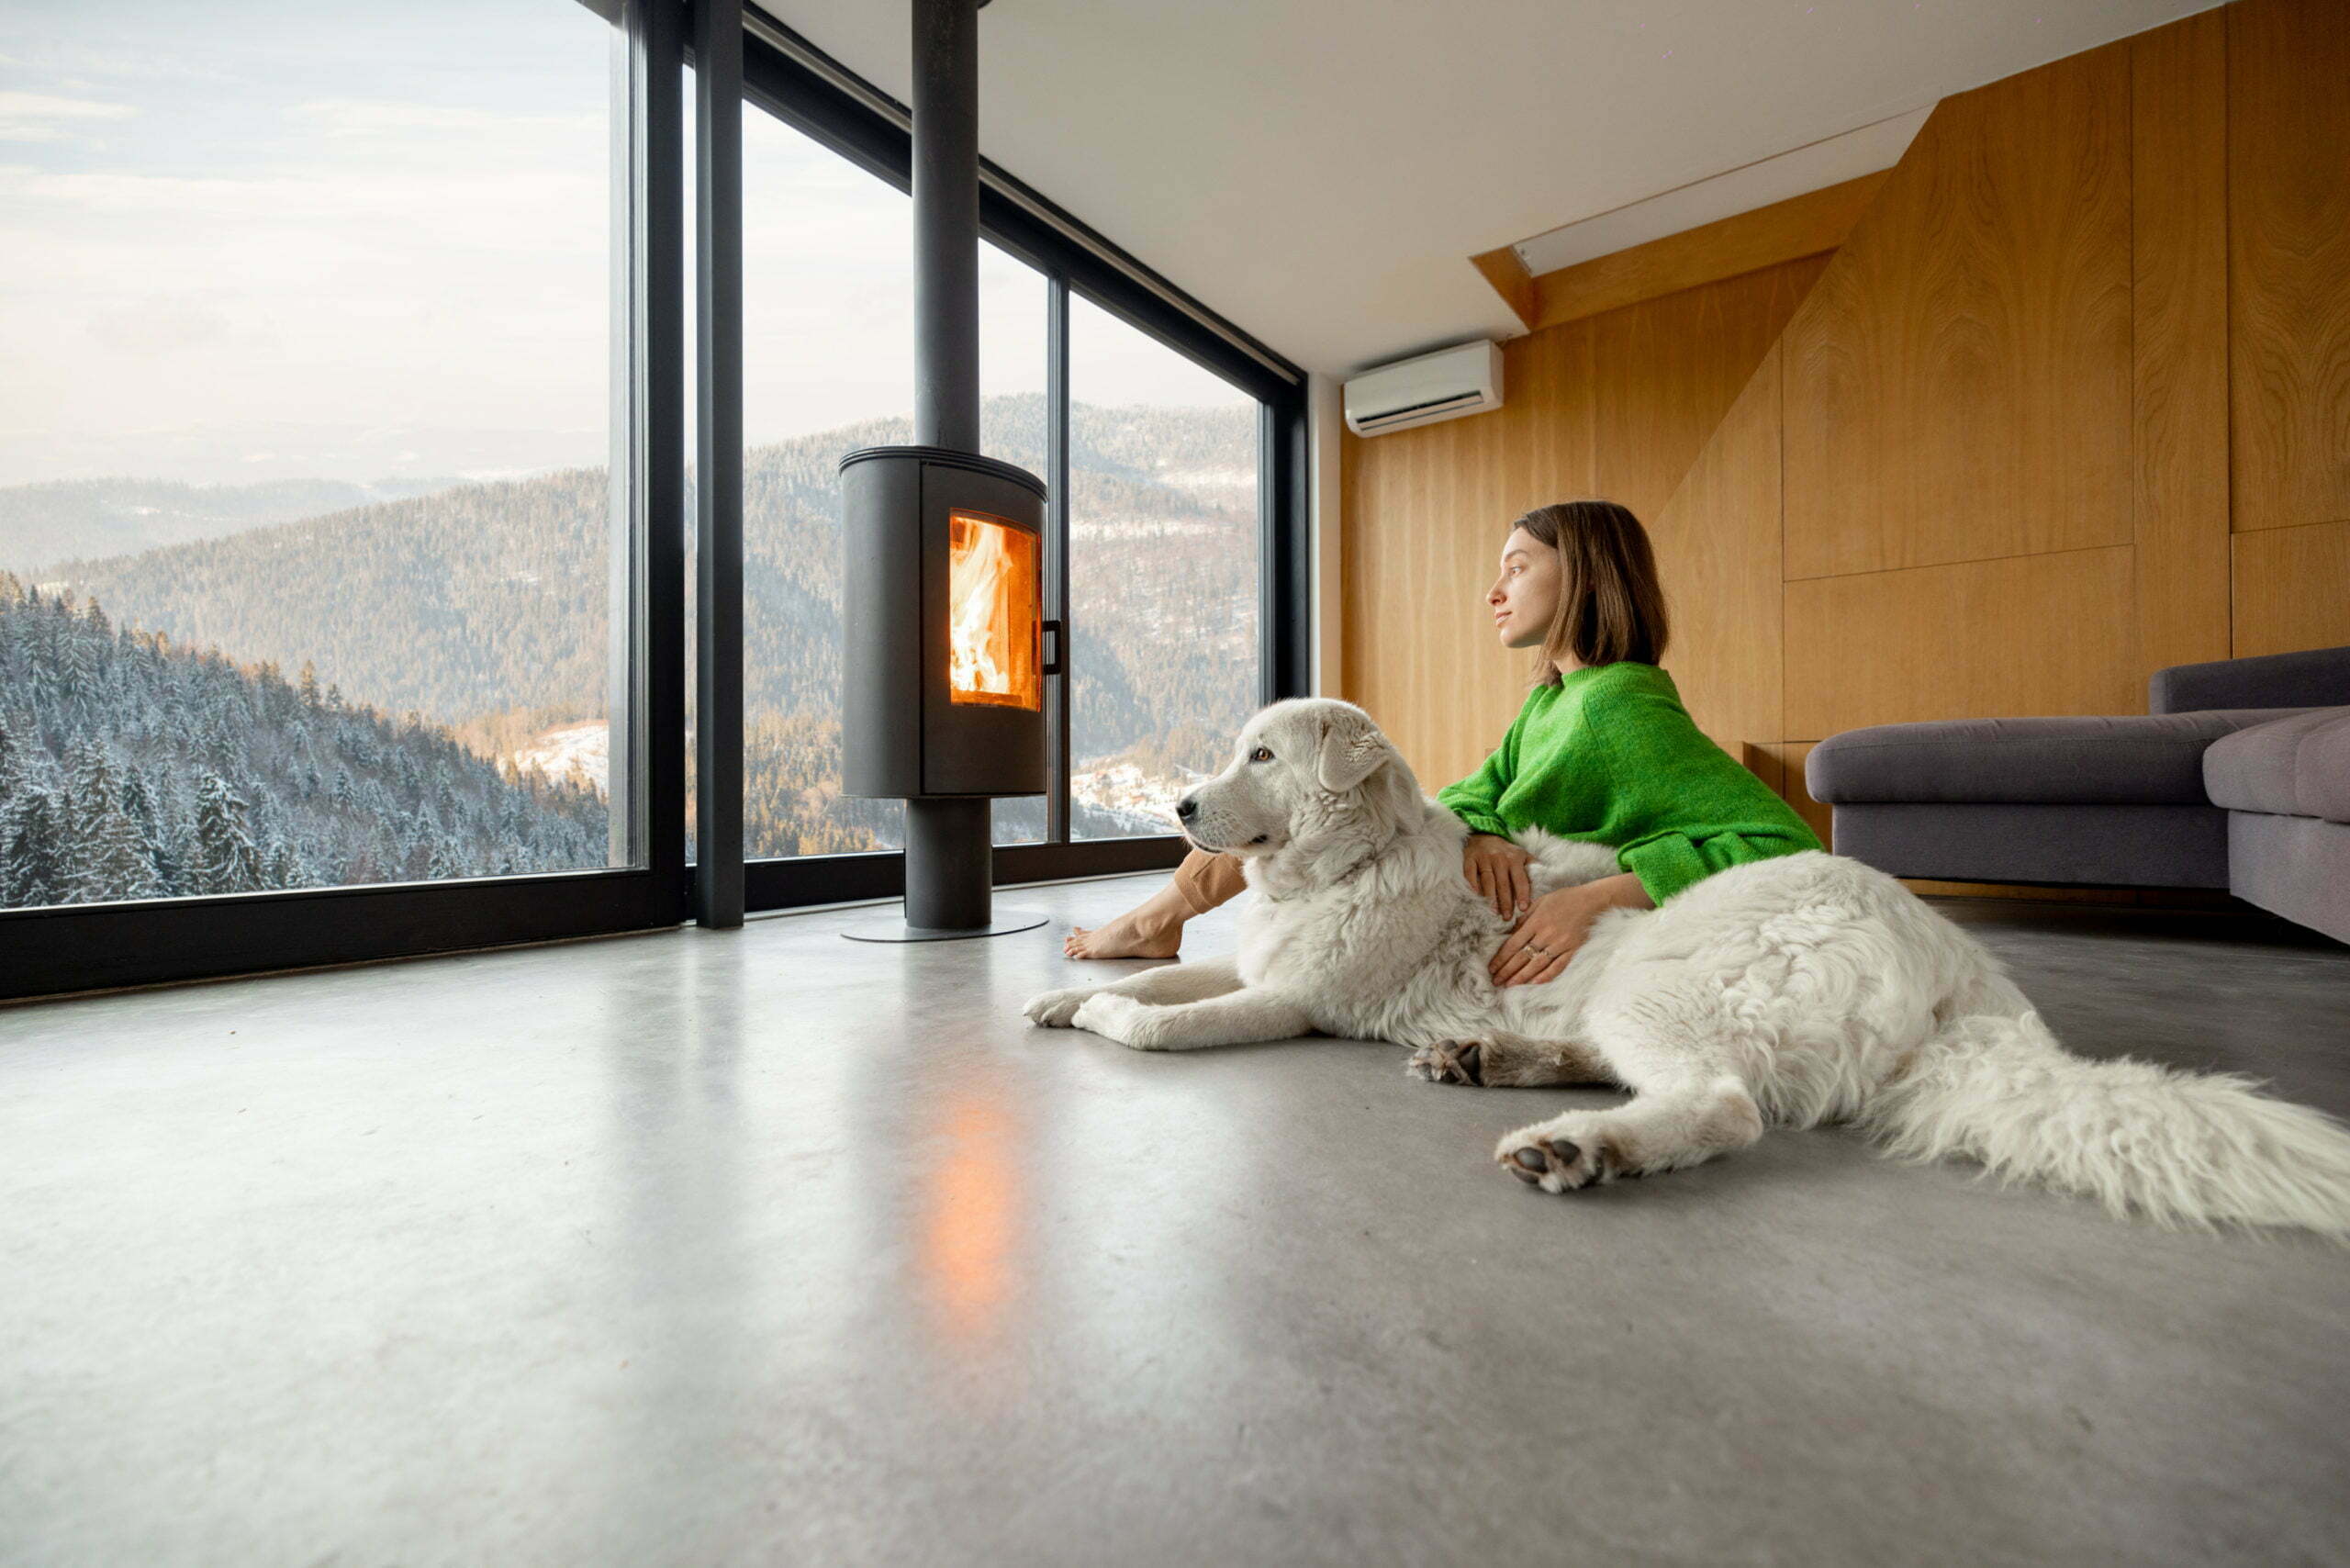 a person and a dog sitting on the floor in front of a fireplace